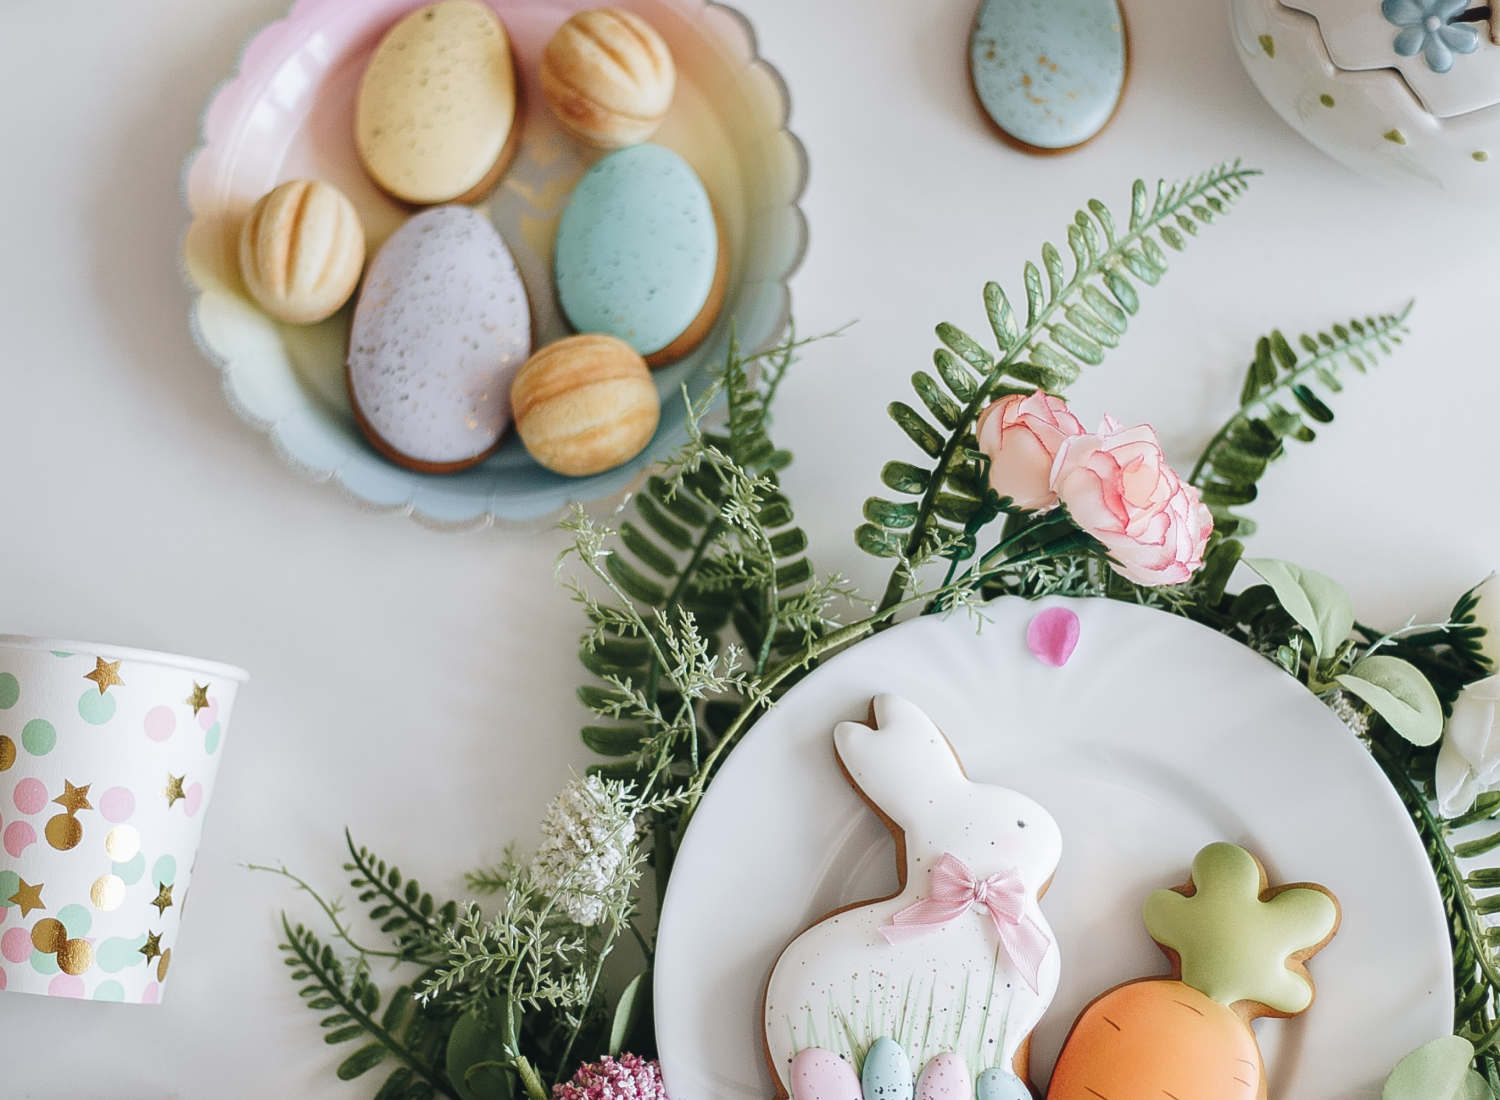 Hop into Easter with our tips